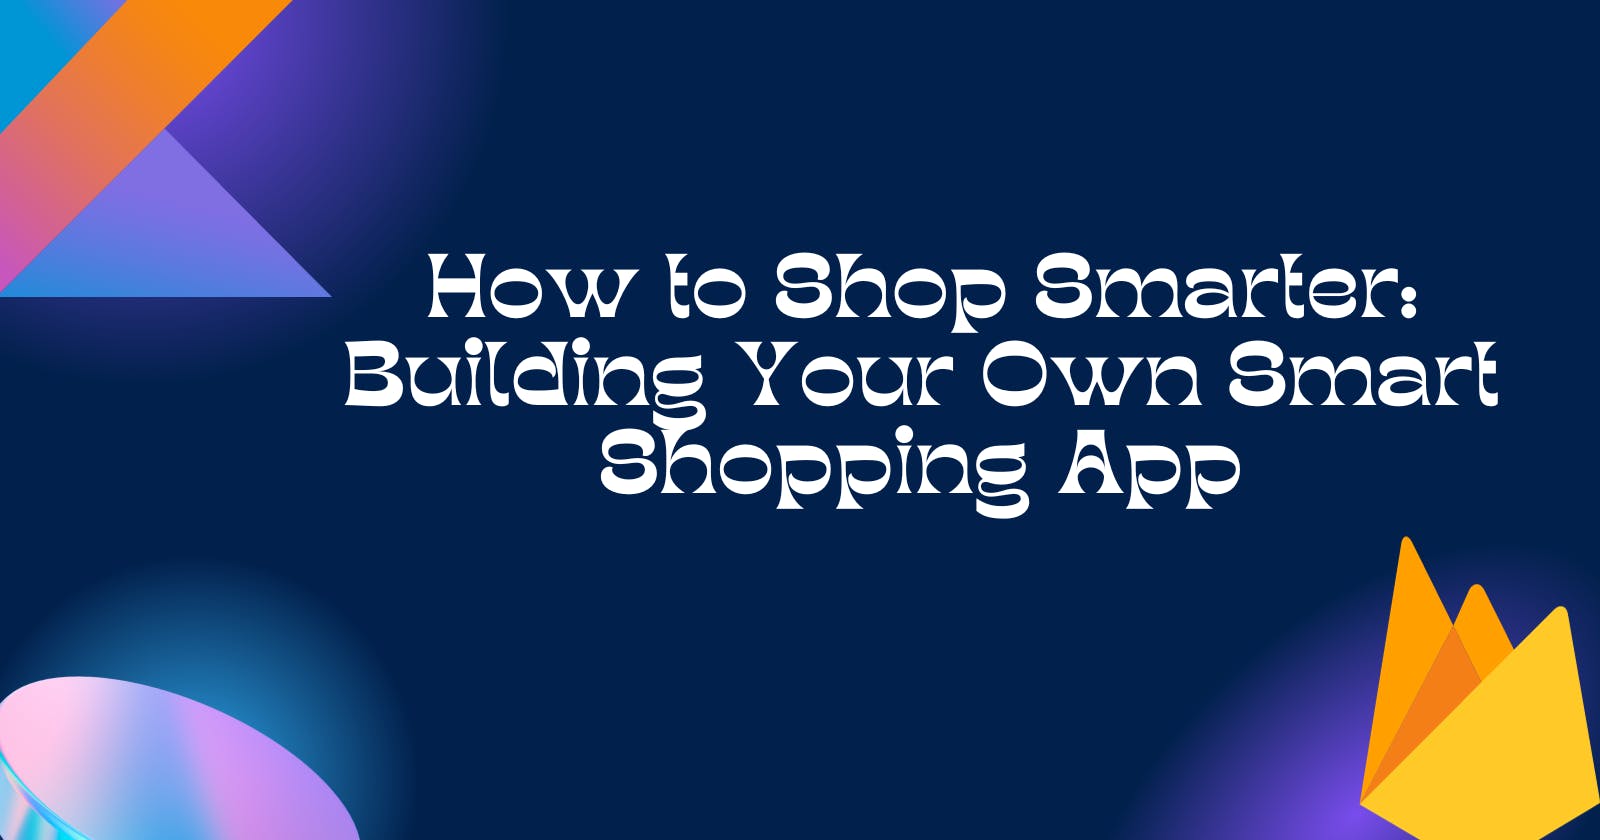 How to Shop Smarter: Building Your Own Smart Shopping App